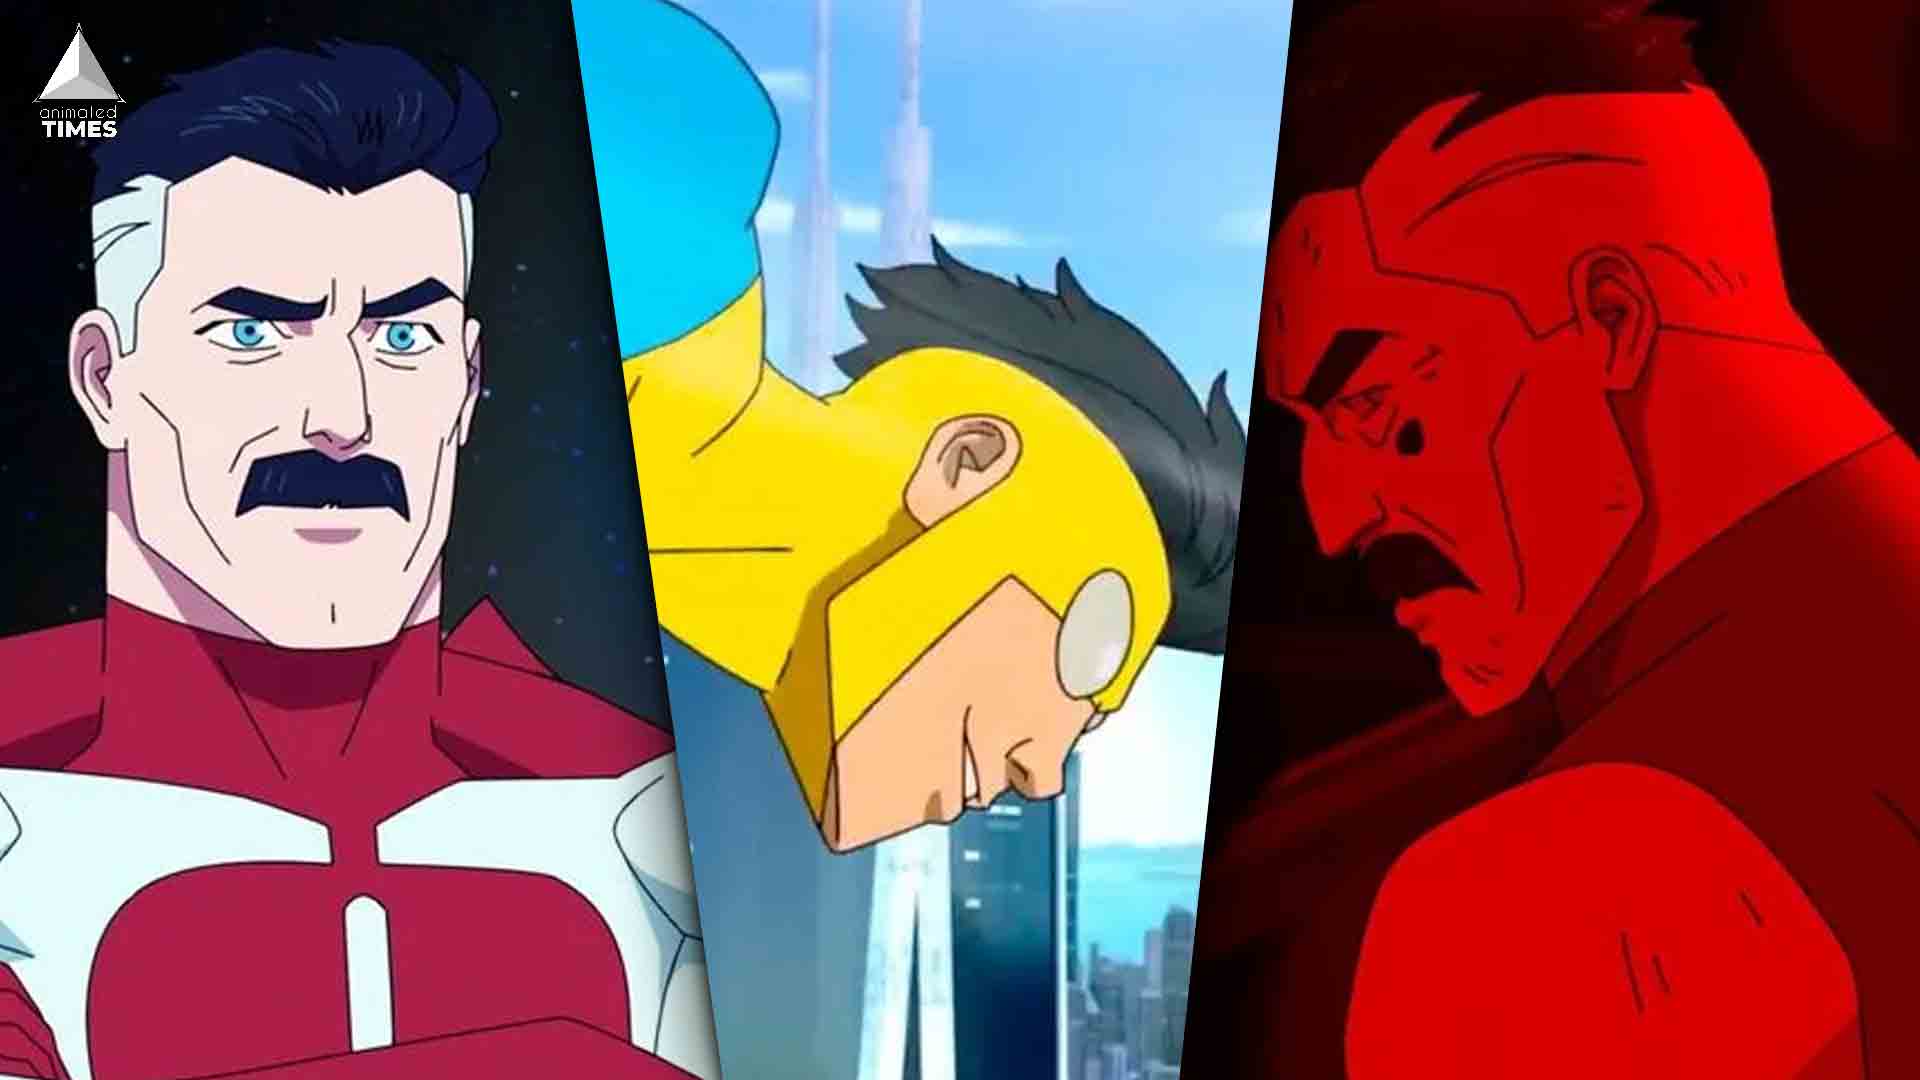 Invincible Creator Explains Why The Explosive Finale Was Only Possible Via Animation, Not Live Action